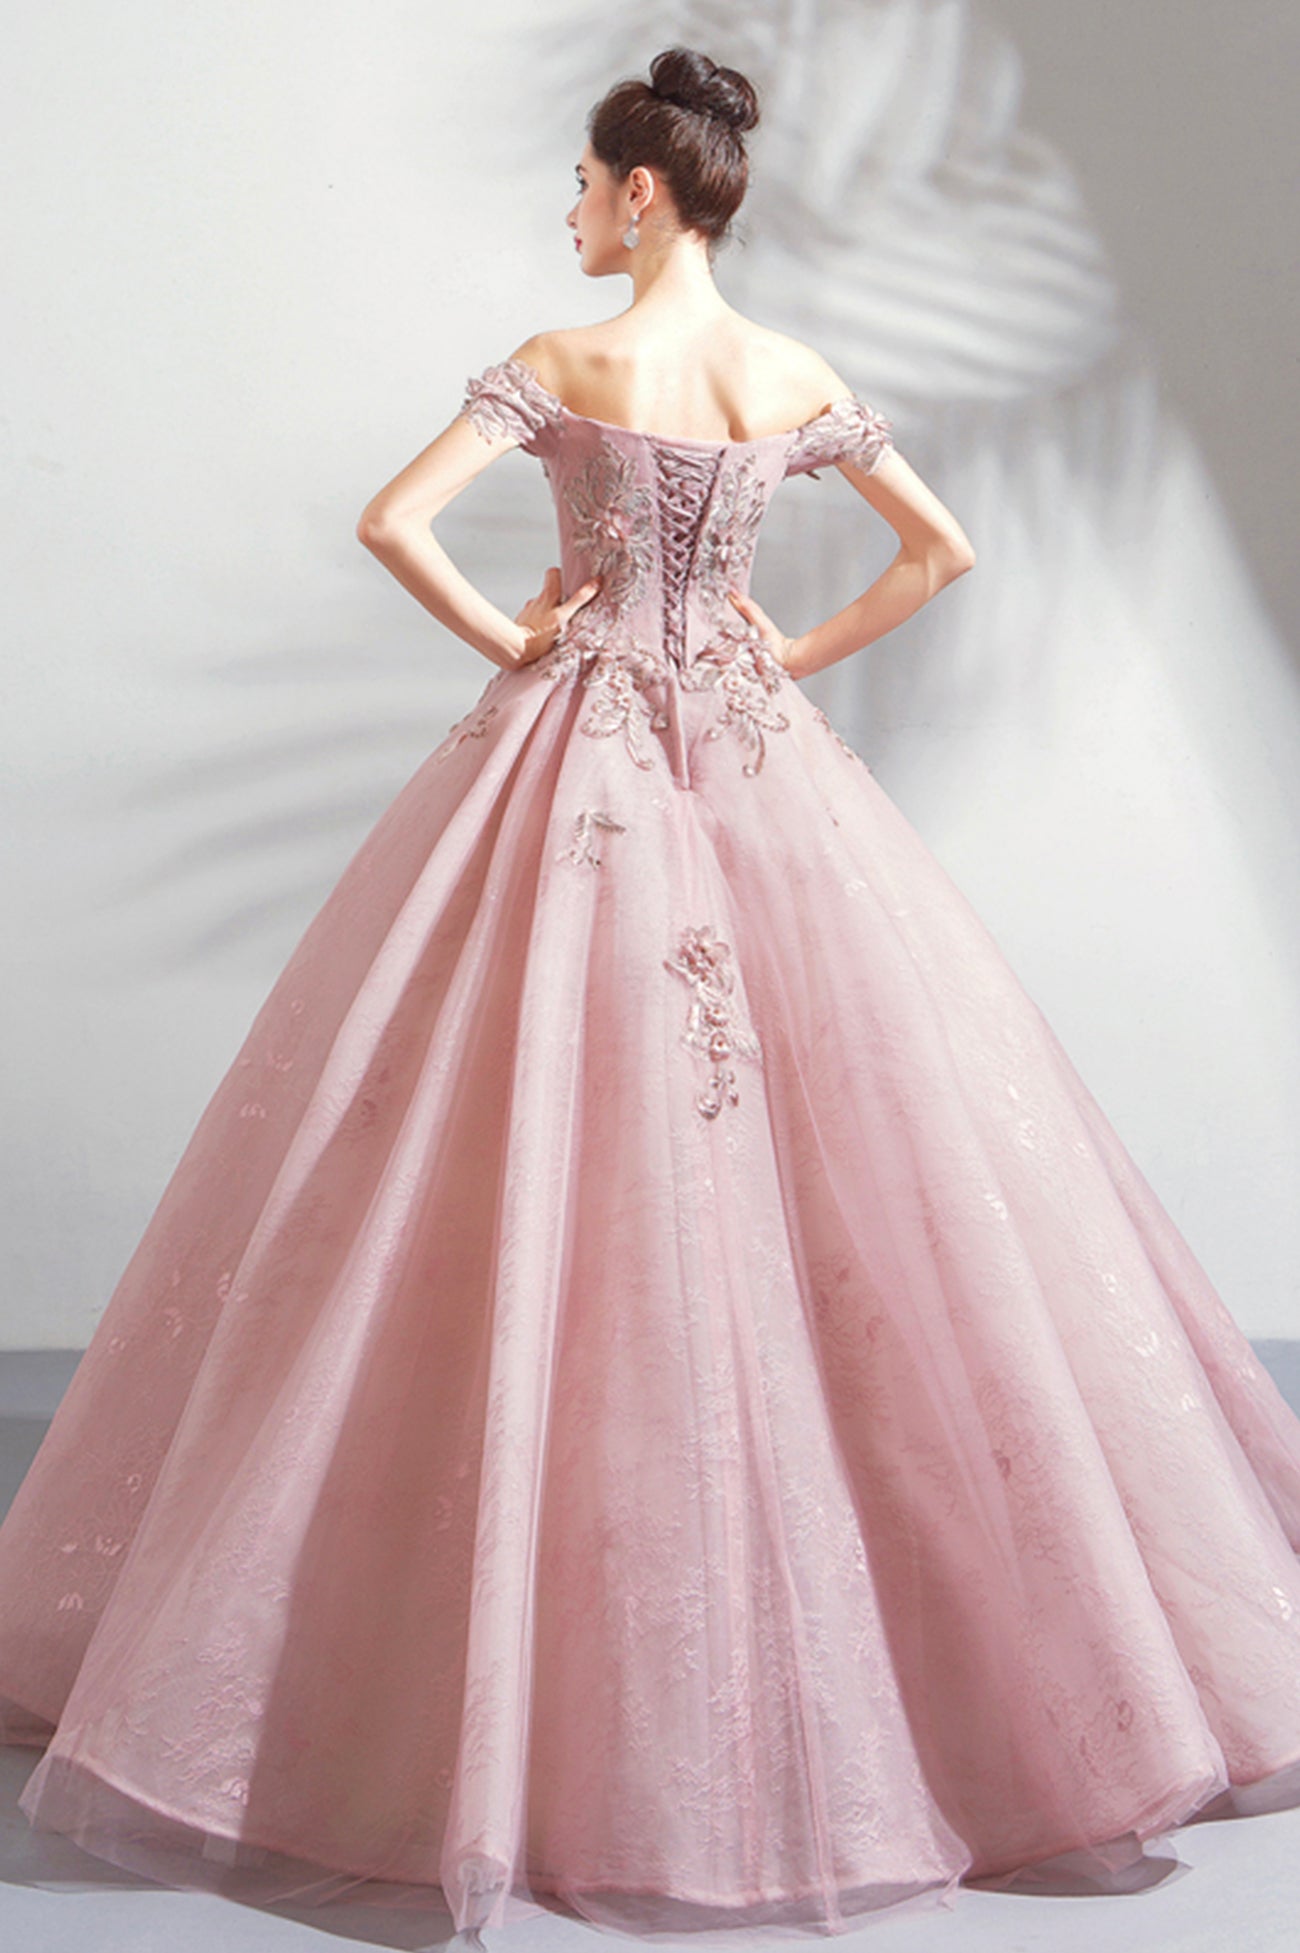 Pink Tulle Lace Long Formal Party Dress, Off the Shoulder Evening Dress